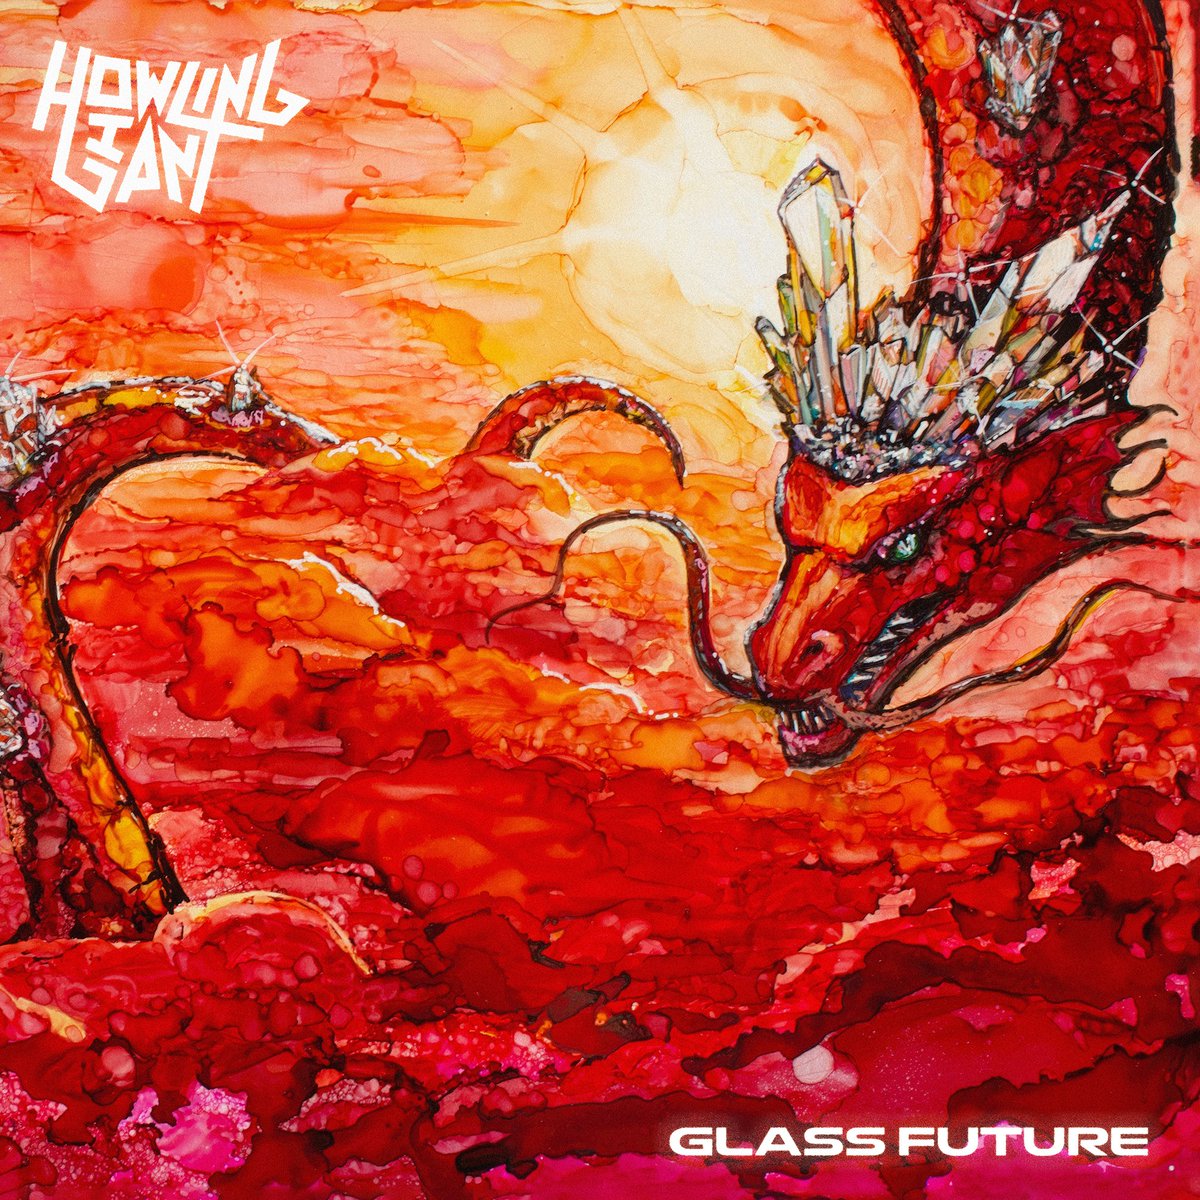 Happy release day, @howlinggiant! Get your copy of 'Glass Future' now if you haven't yet! lnk.spkr.media/glass-future